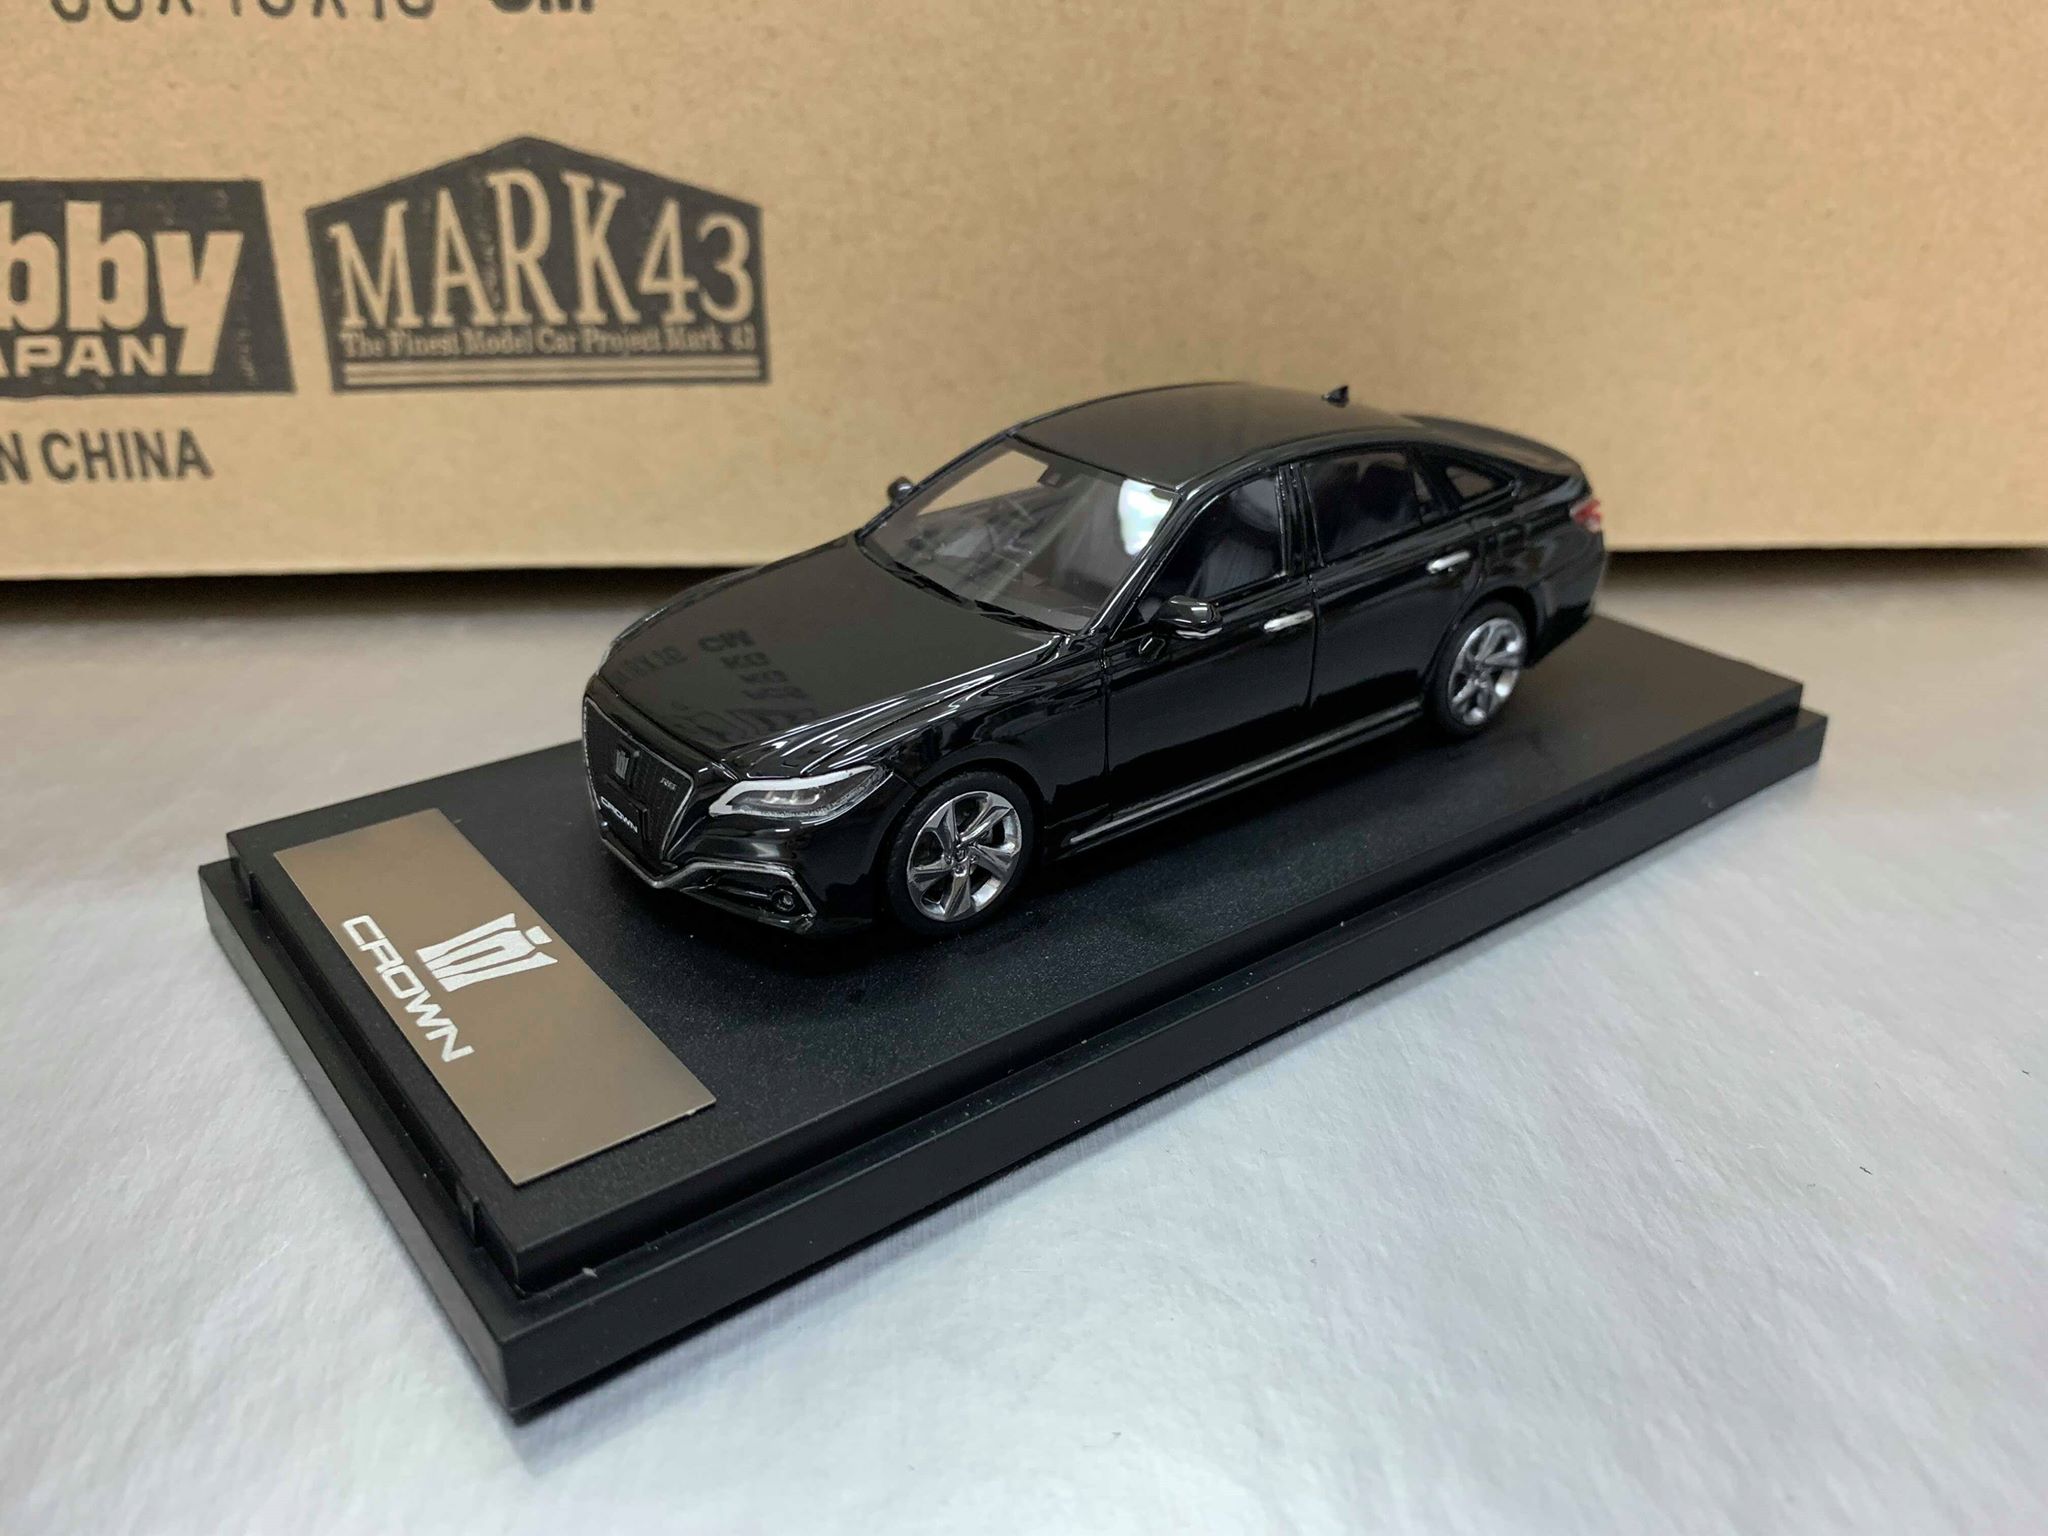 Mark43 1/43 Toyota Soarer 3.0 GT Aero Cabin Crystal White Toning II PM43100WS for sale online 